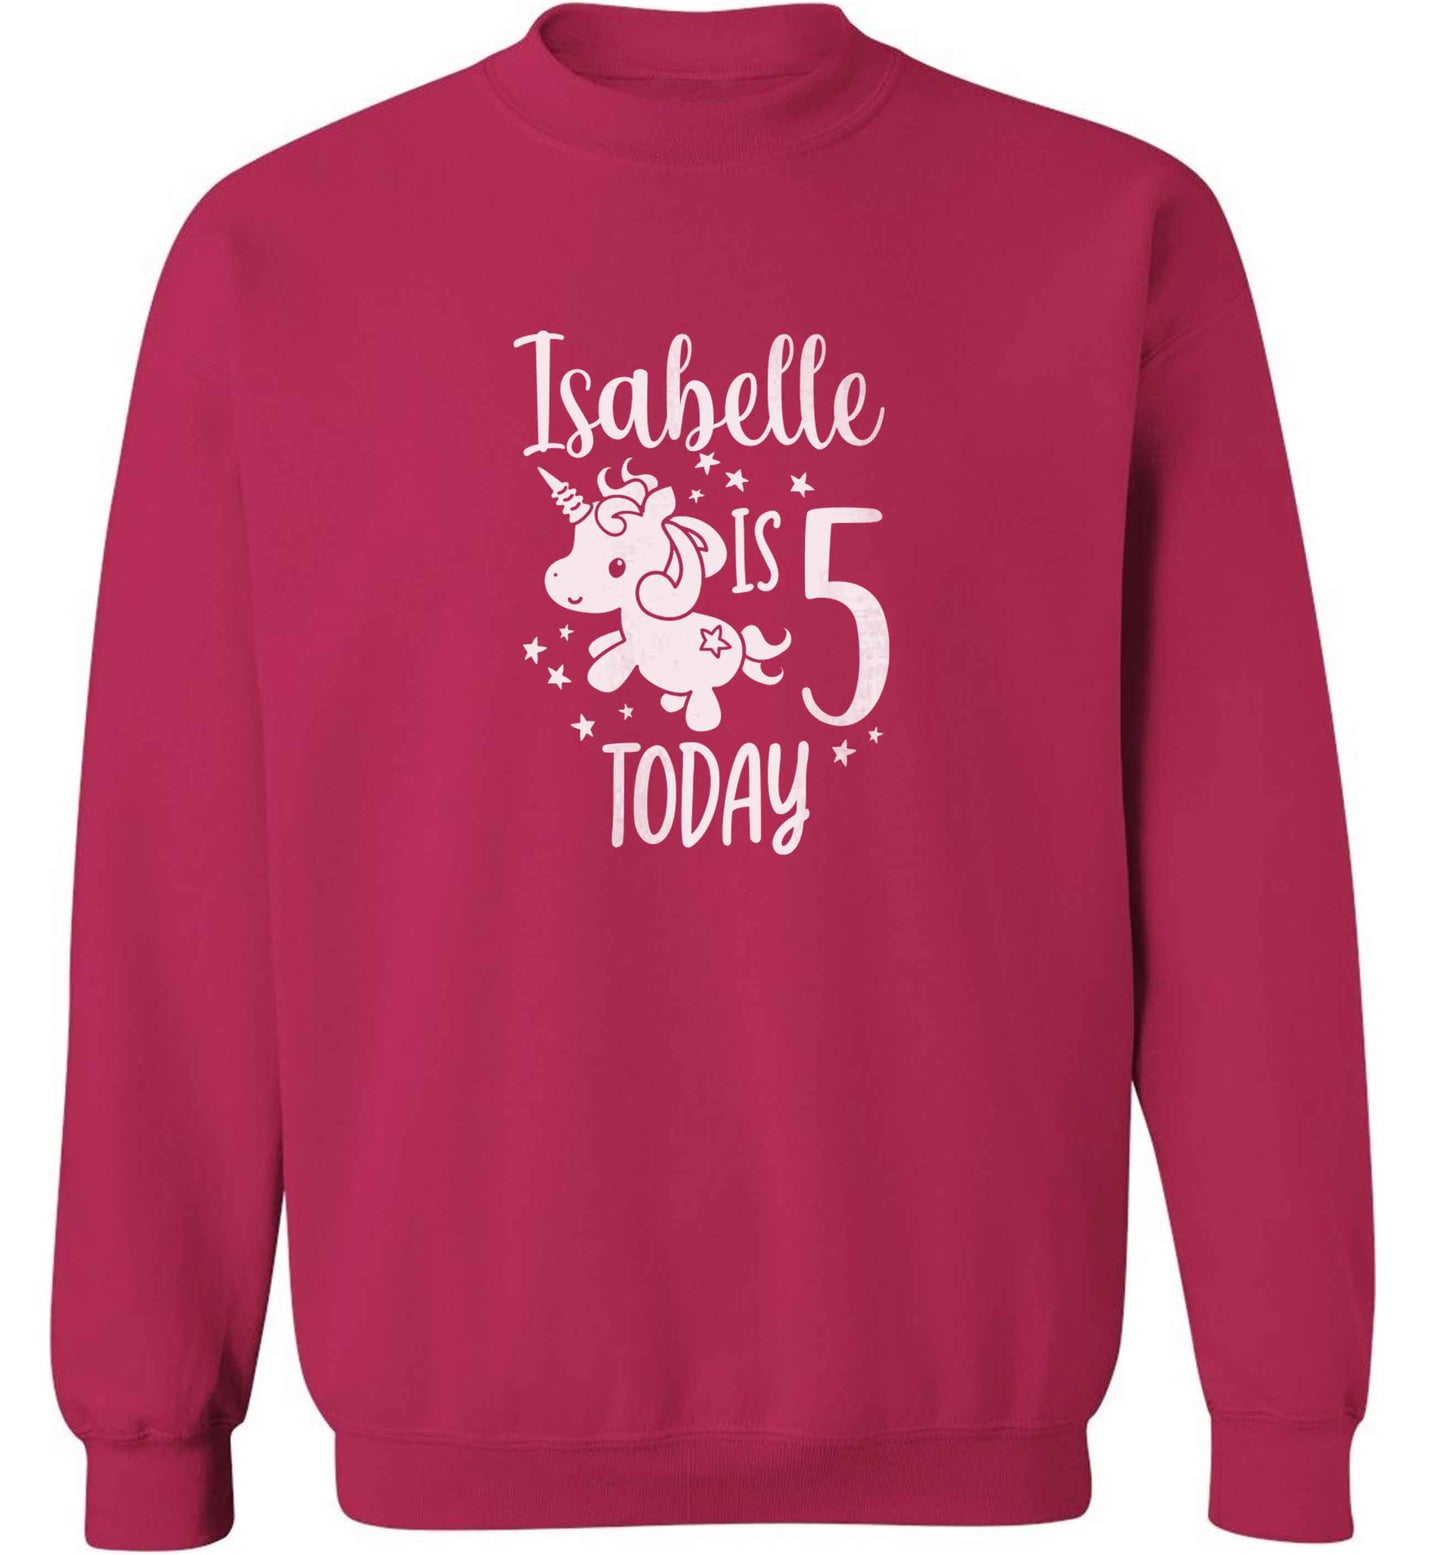 Today I am - Personalise with any name or age! Birthday unicorn adult's unisex pink sweater 2XL